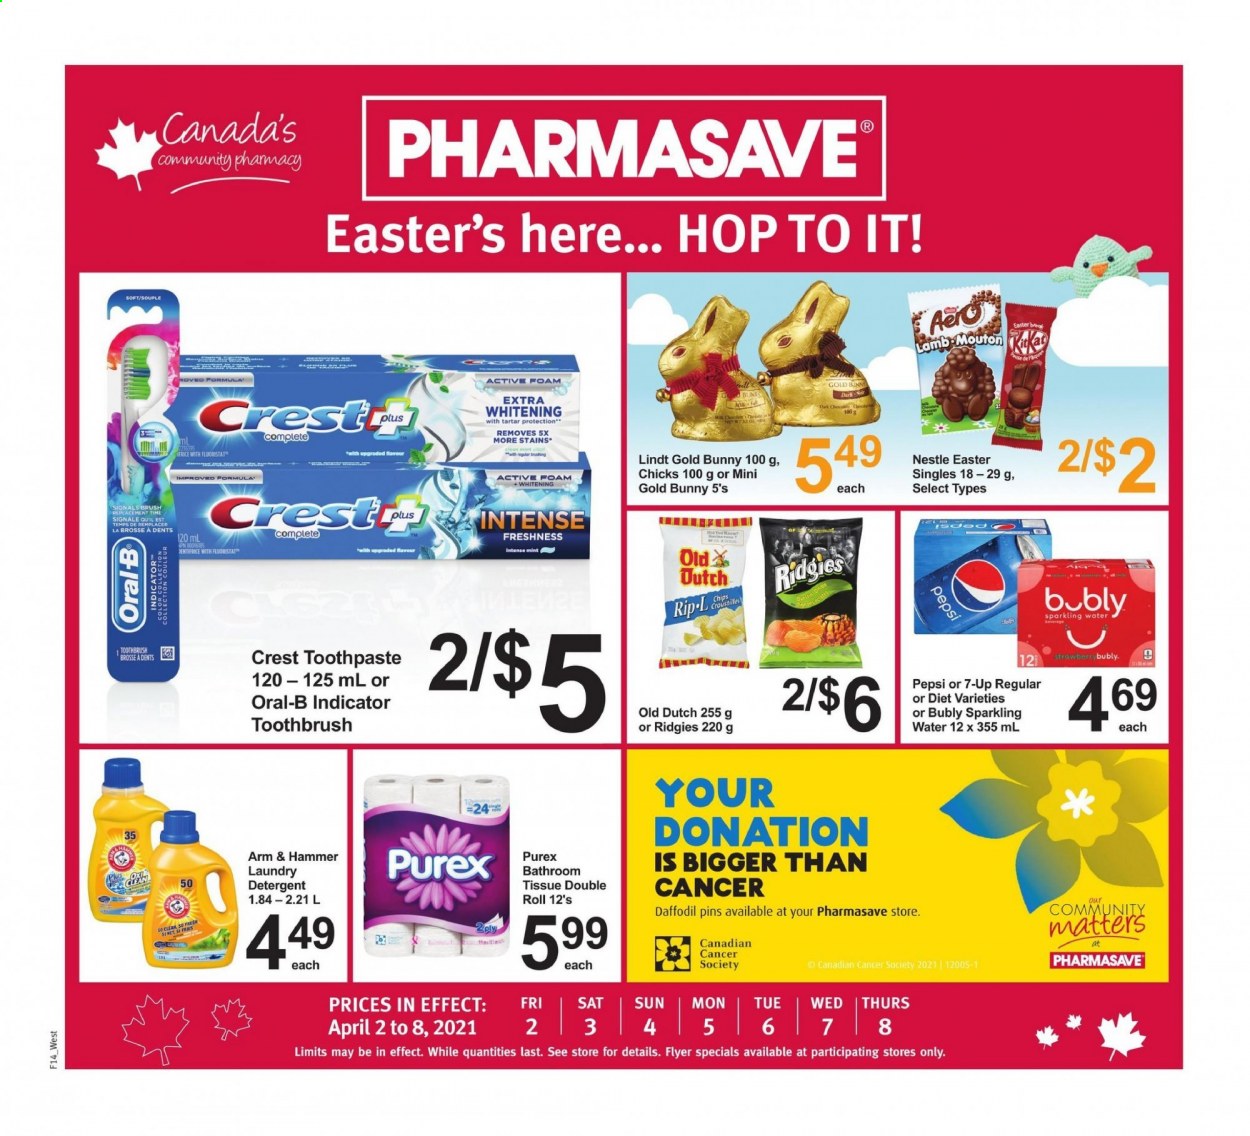 thumbnail - Pharmasave Flyer - April 02, 2021 - April 08, 2021 - Sales products - KitKat, ARM & HAMMER, Pepsi, 7UP, sparkling water, bath tissue, laundry detergent, Purex, toothbrush, toothpaste, Crest, pin, Nestlé, Oral-B, chips. Page 1.